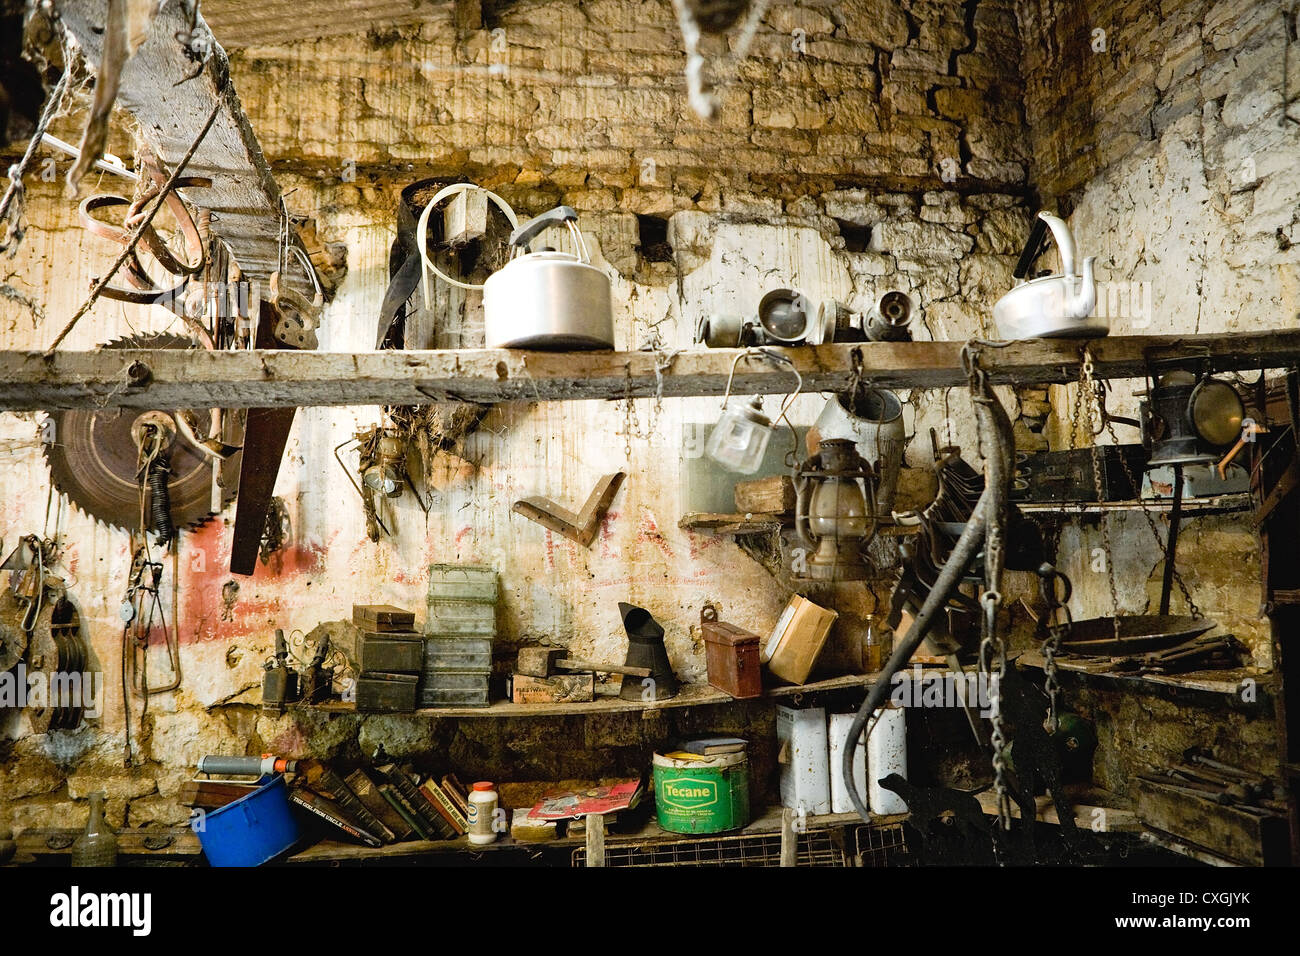 Old stone Garden Shed with assortment of tools and bric-a-brac Stock Photo